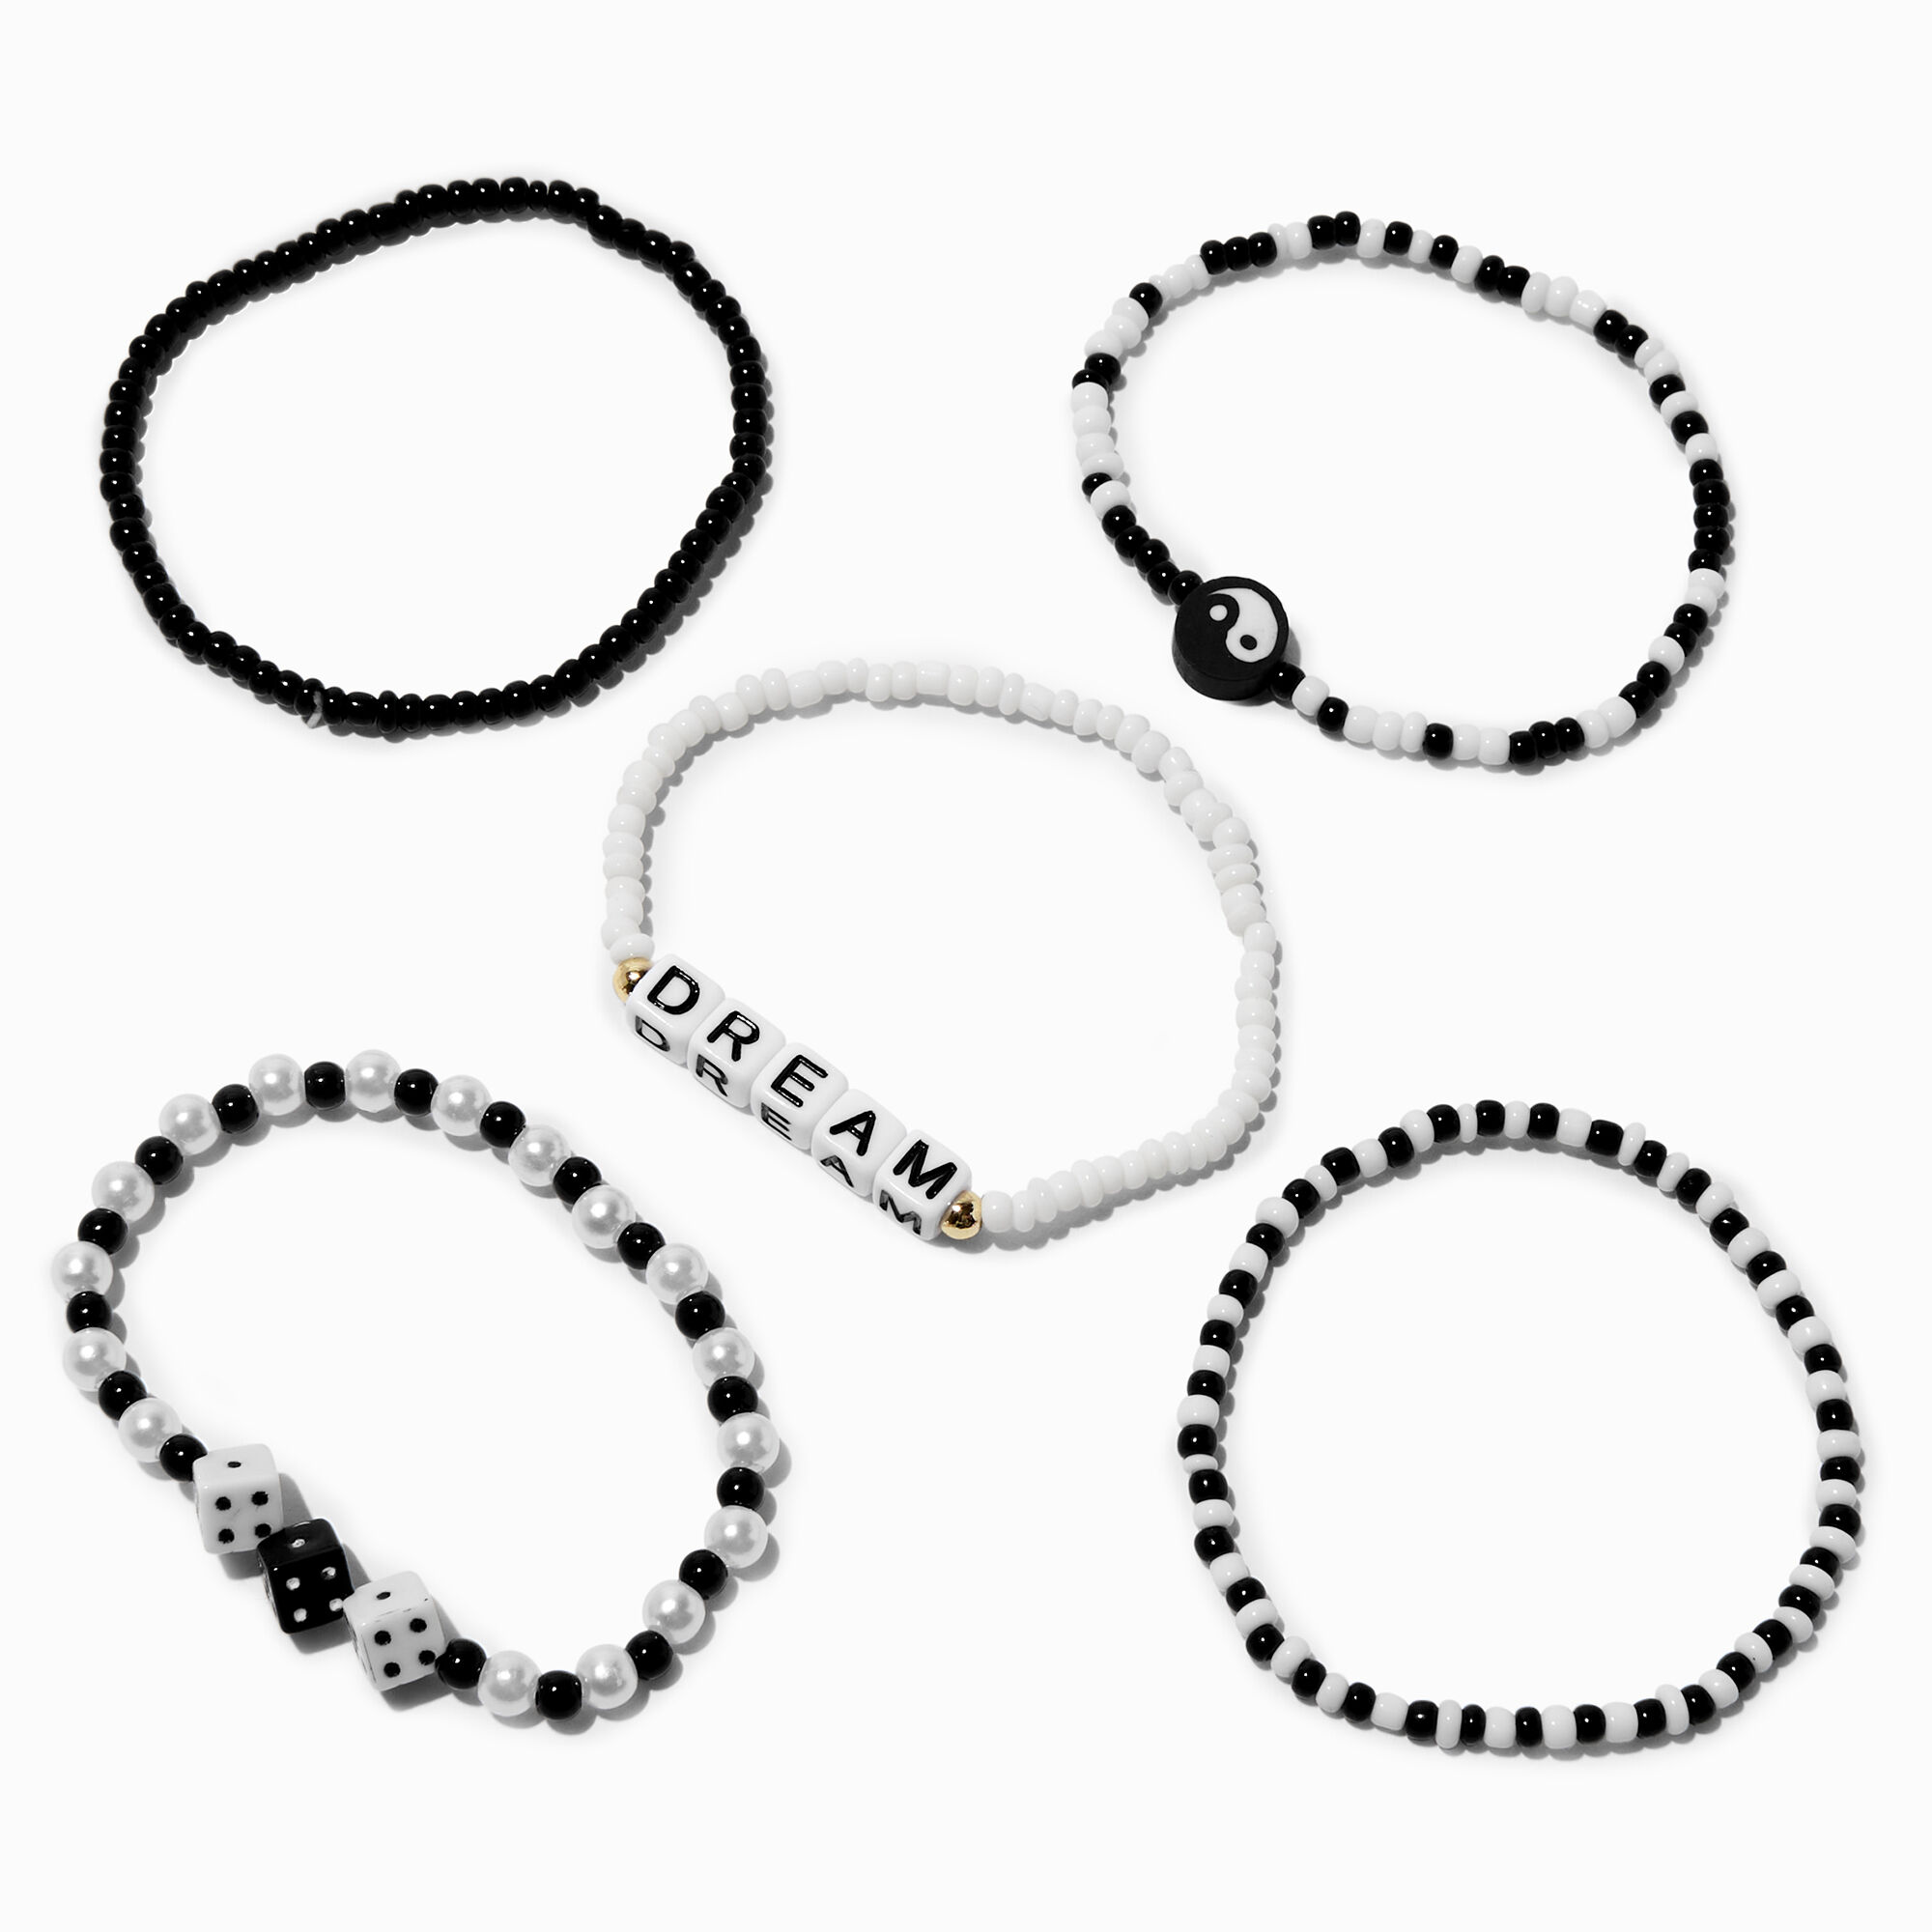 View Claires Black Dream Beaded Stretch Bracelets 5 Pack White information